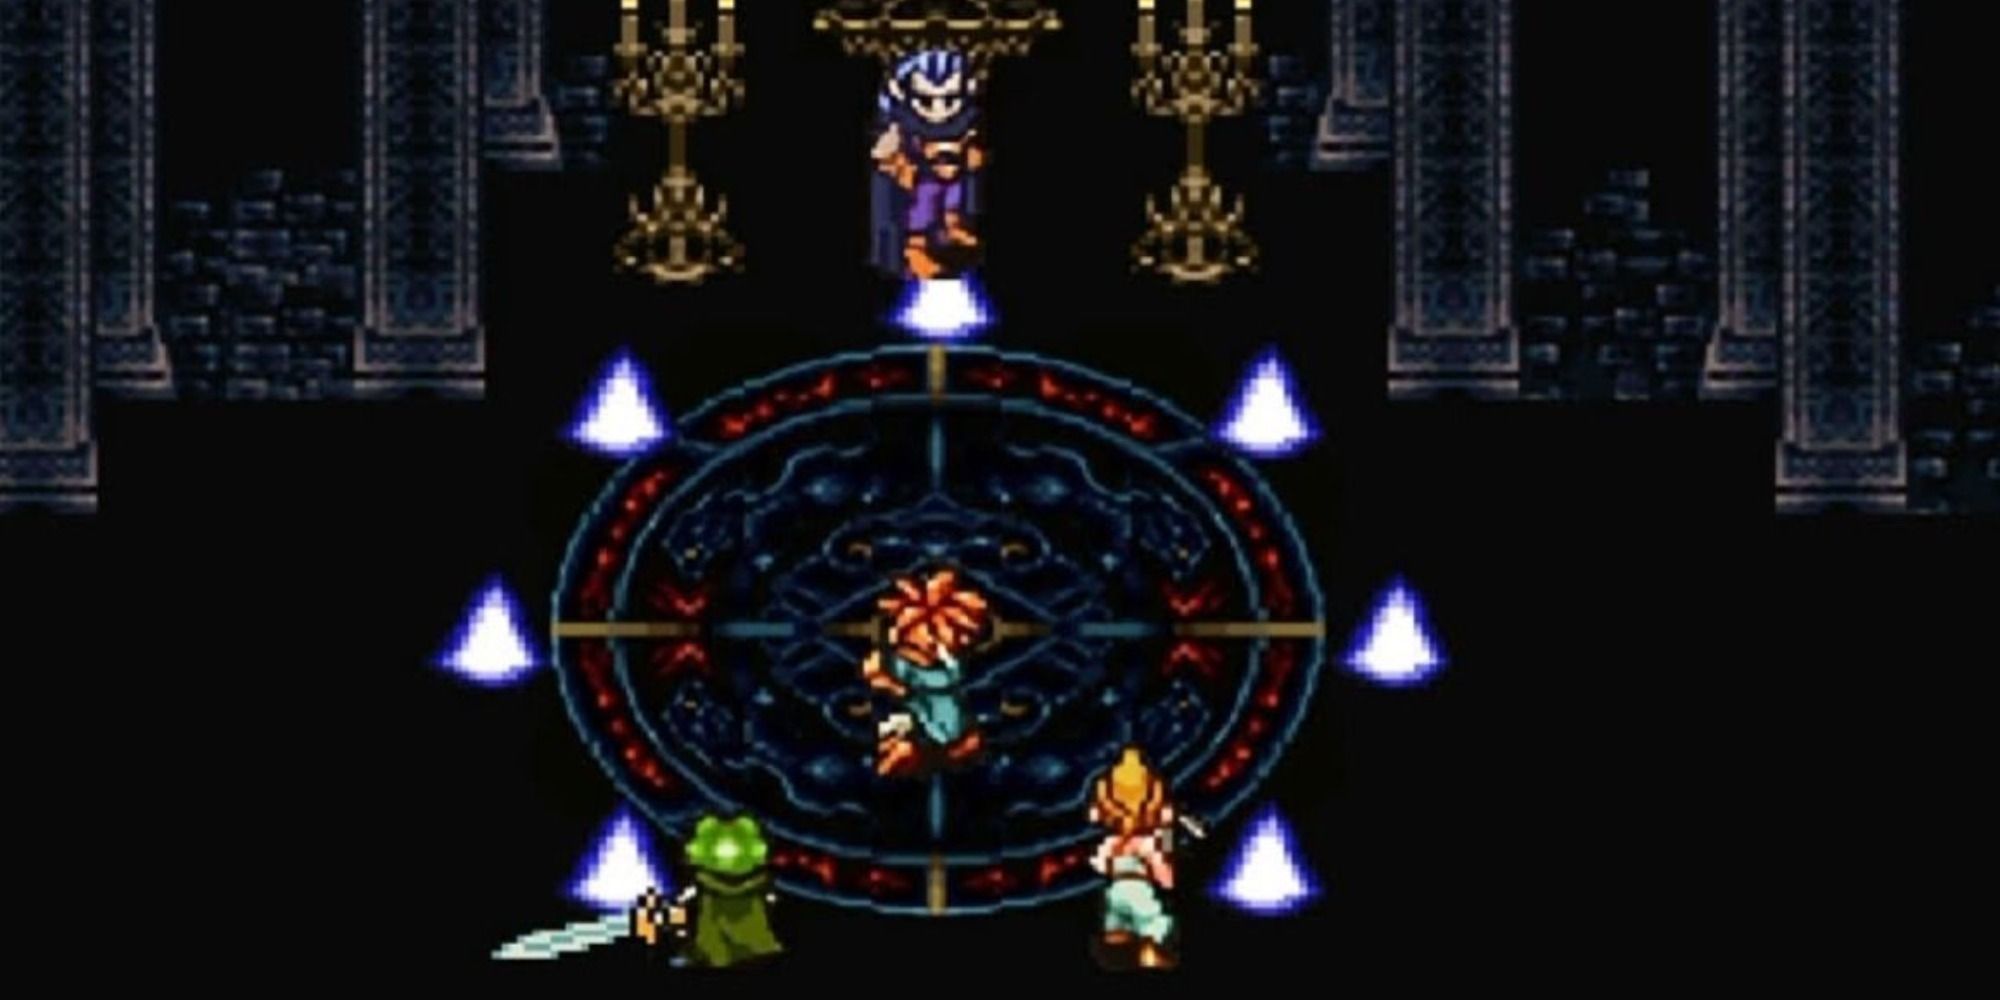 Crono, Marle, and Frog facing Magus in Chrono Trigger